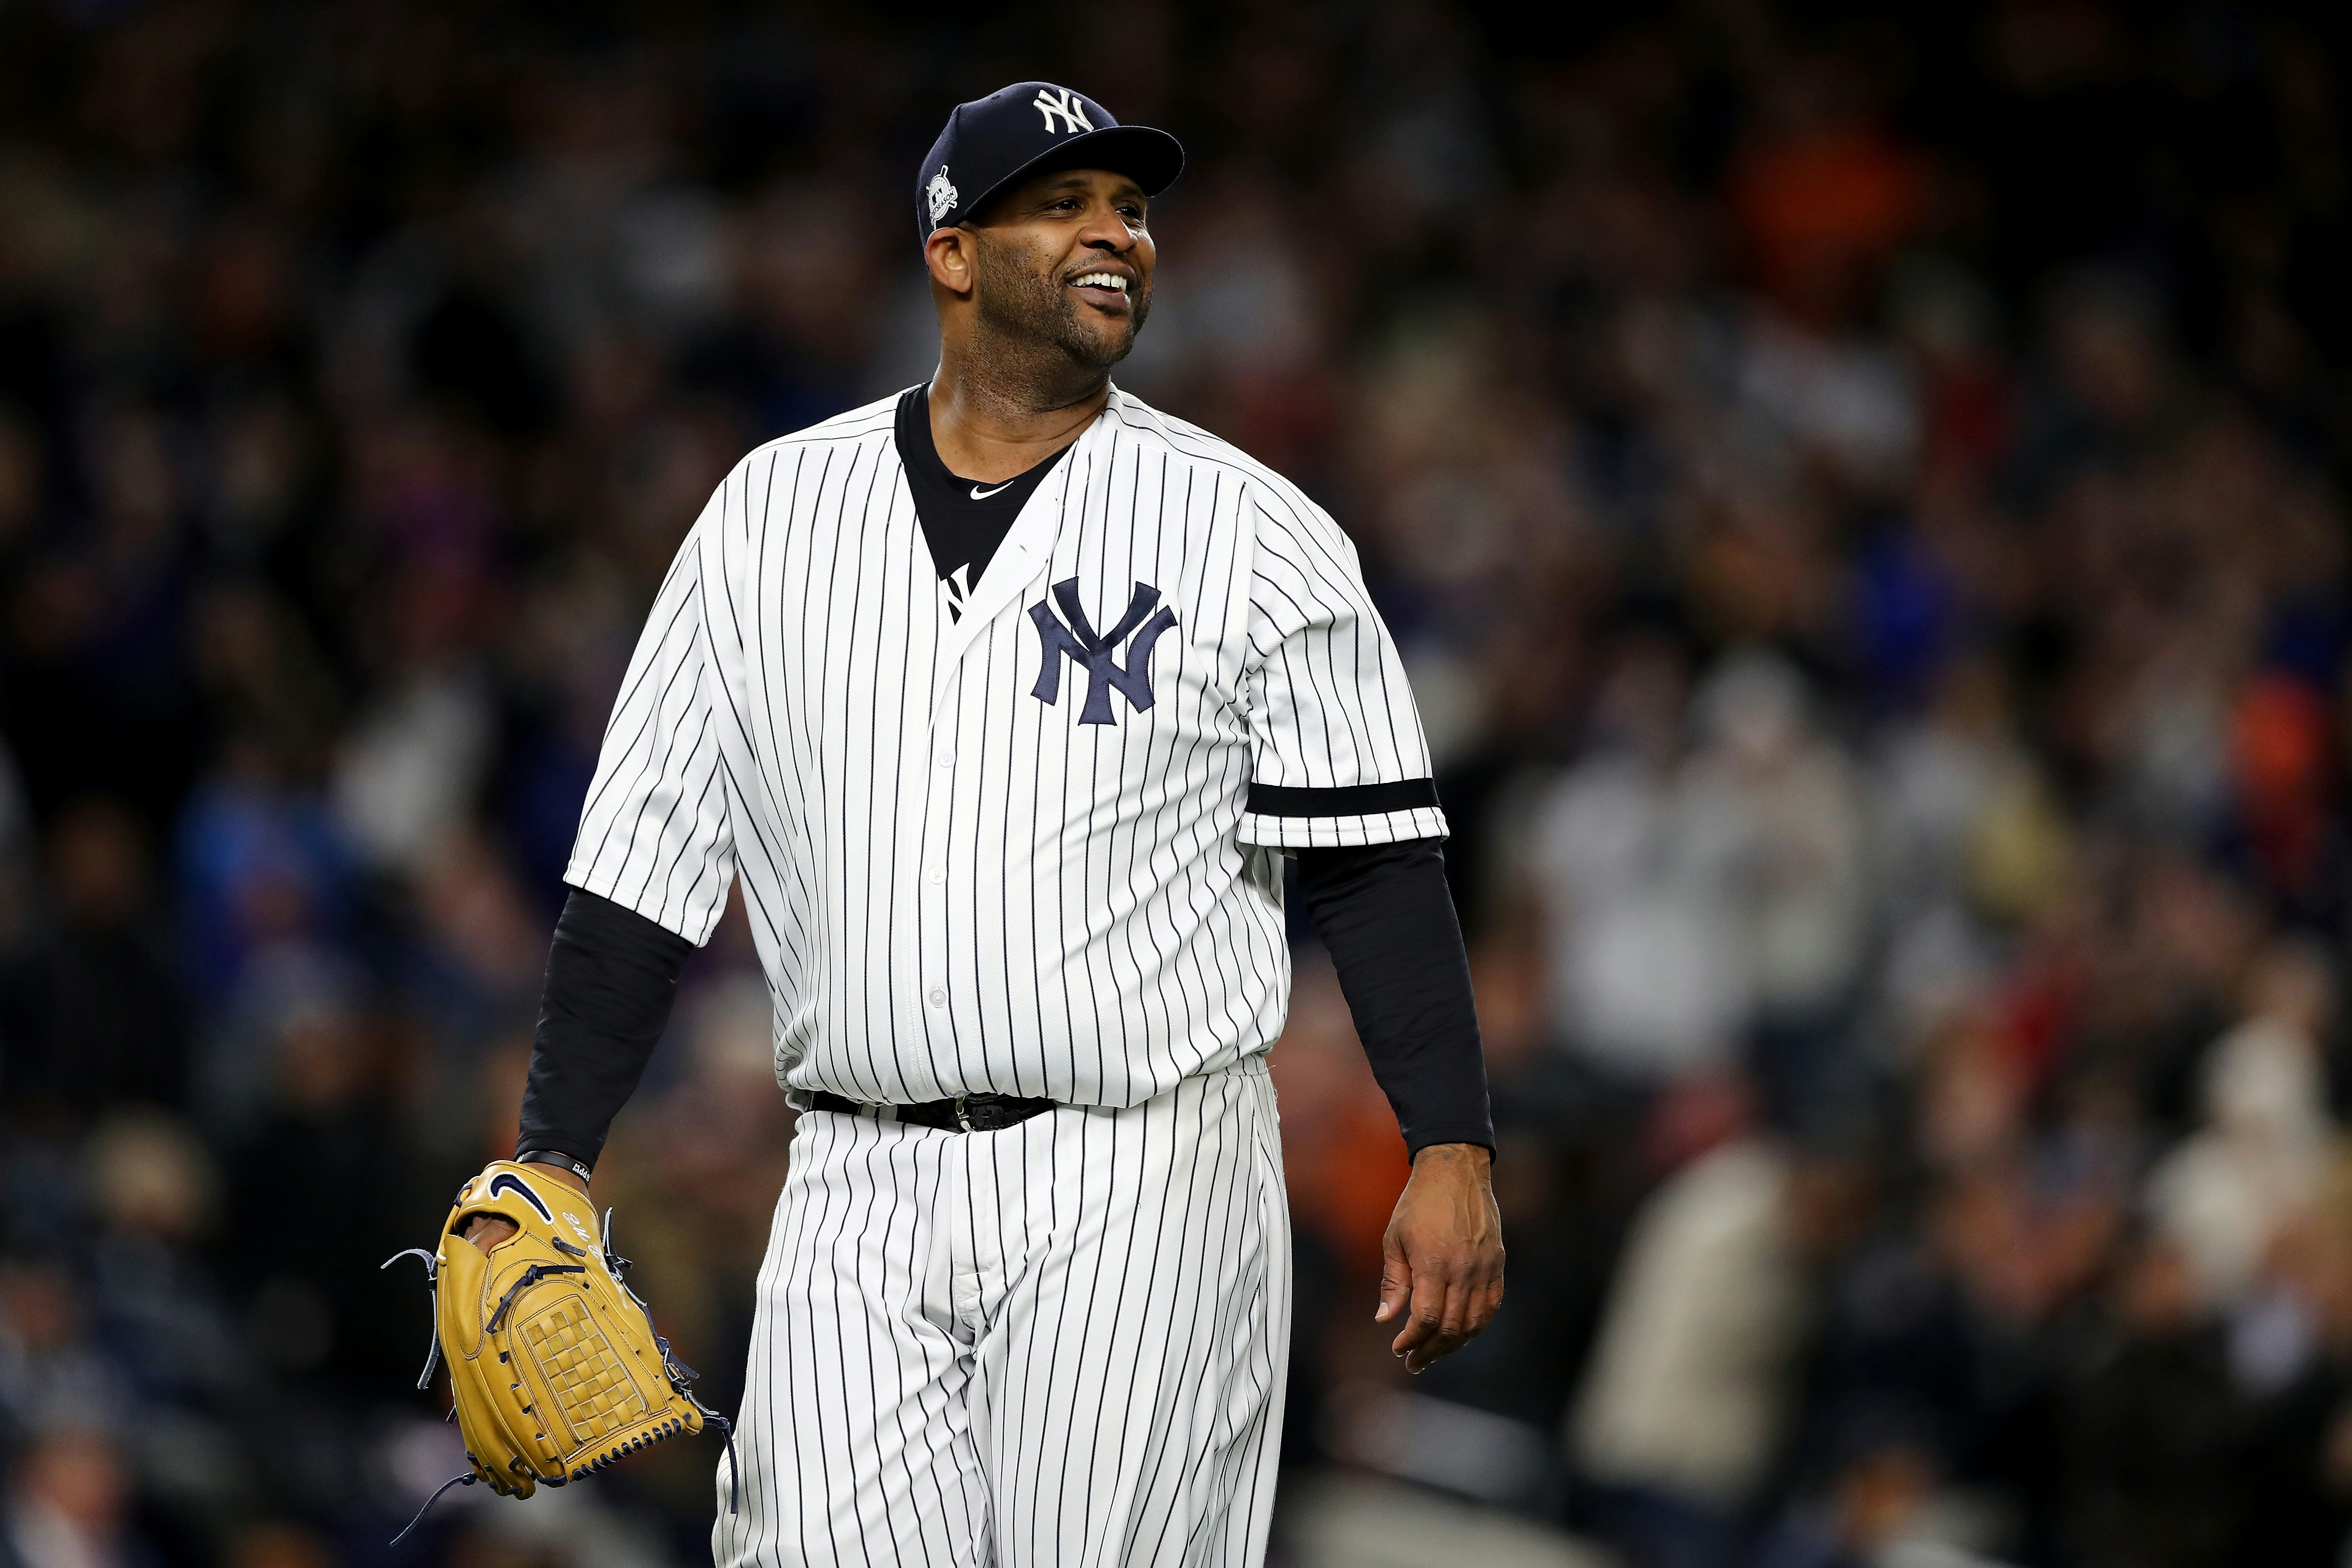 MLB roundup: CC Sabathia ejected but gets victory as Yankees top